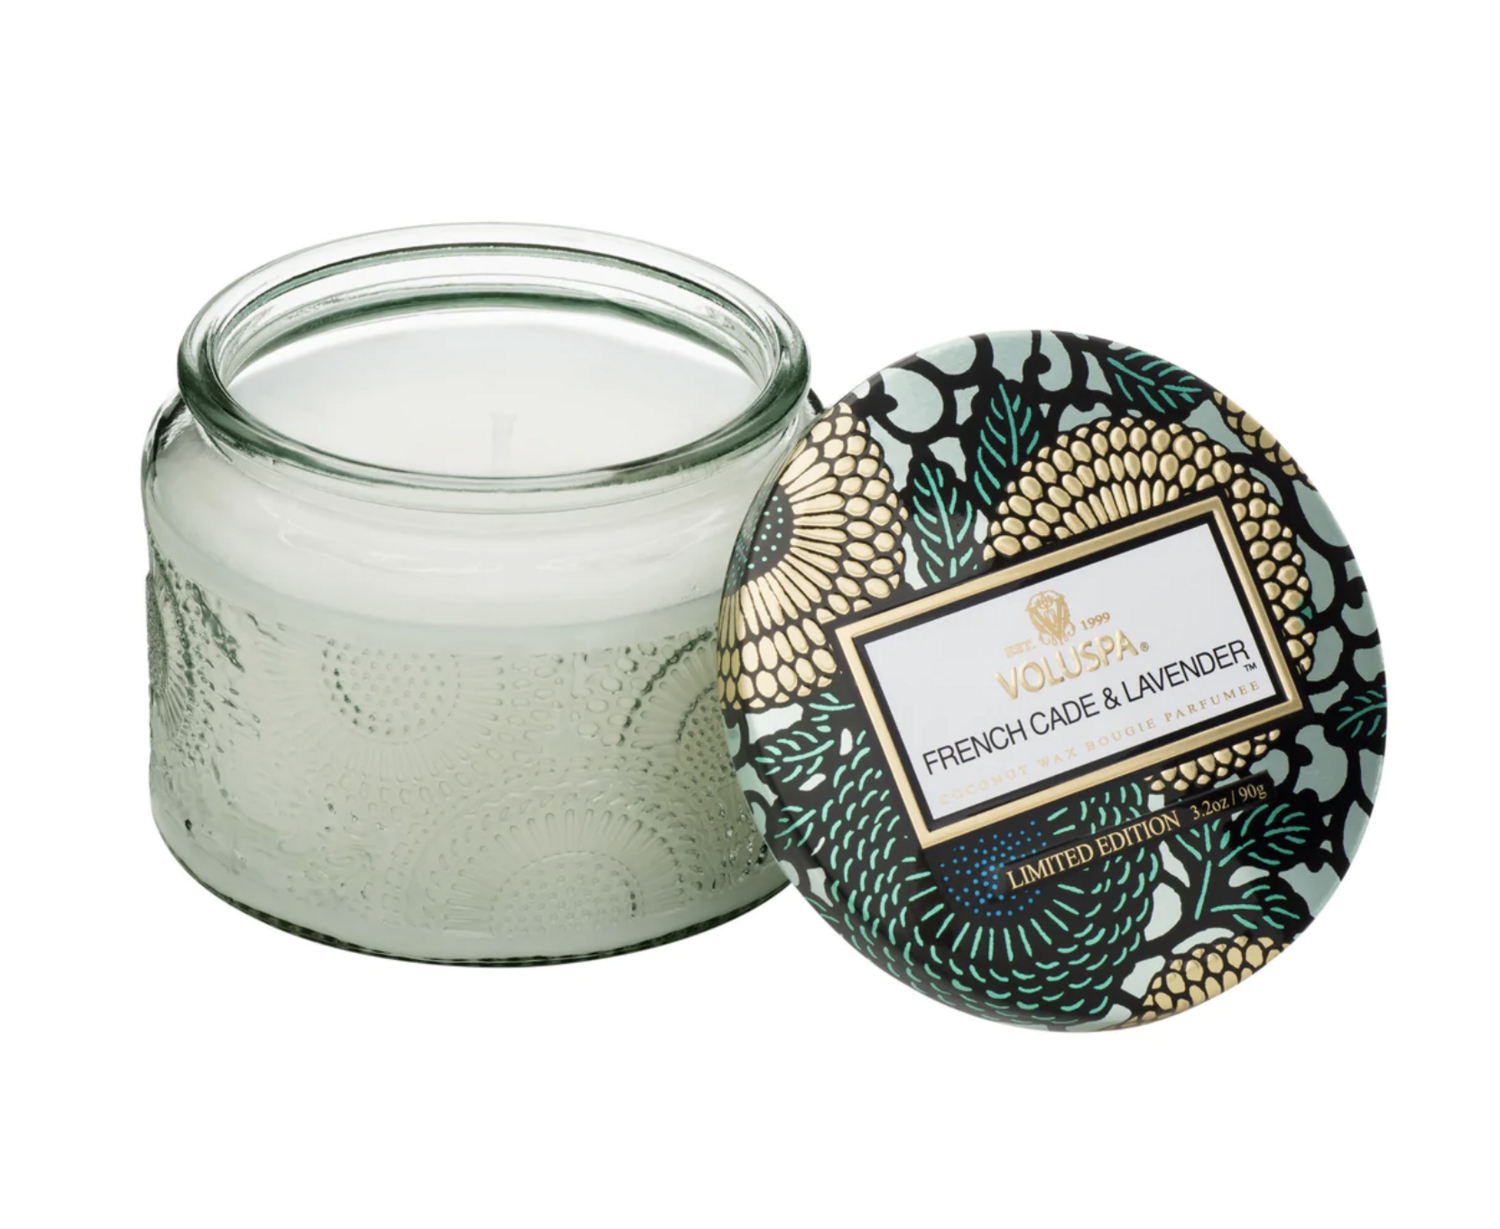 French Cade Candle- Petite